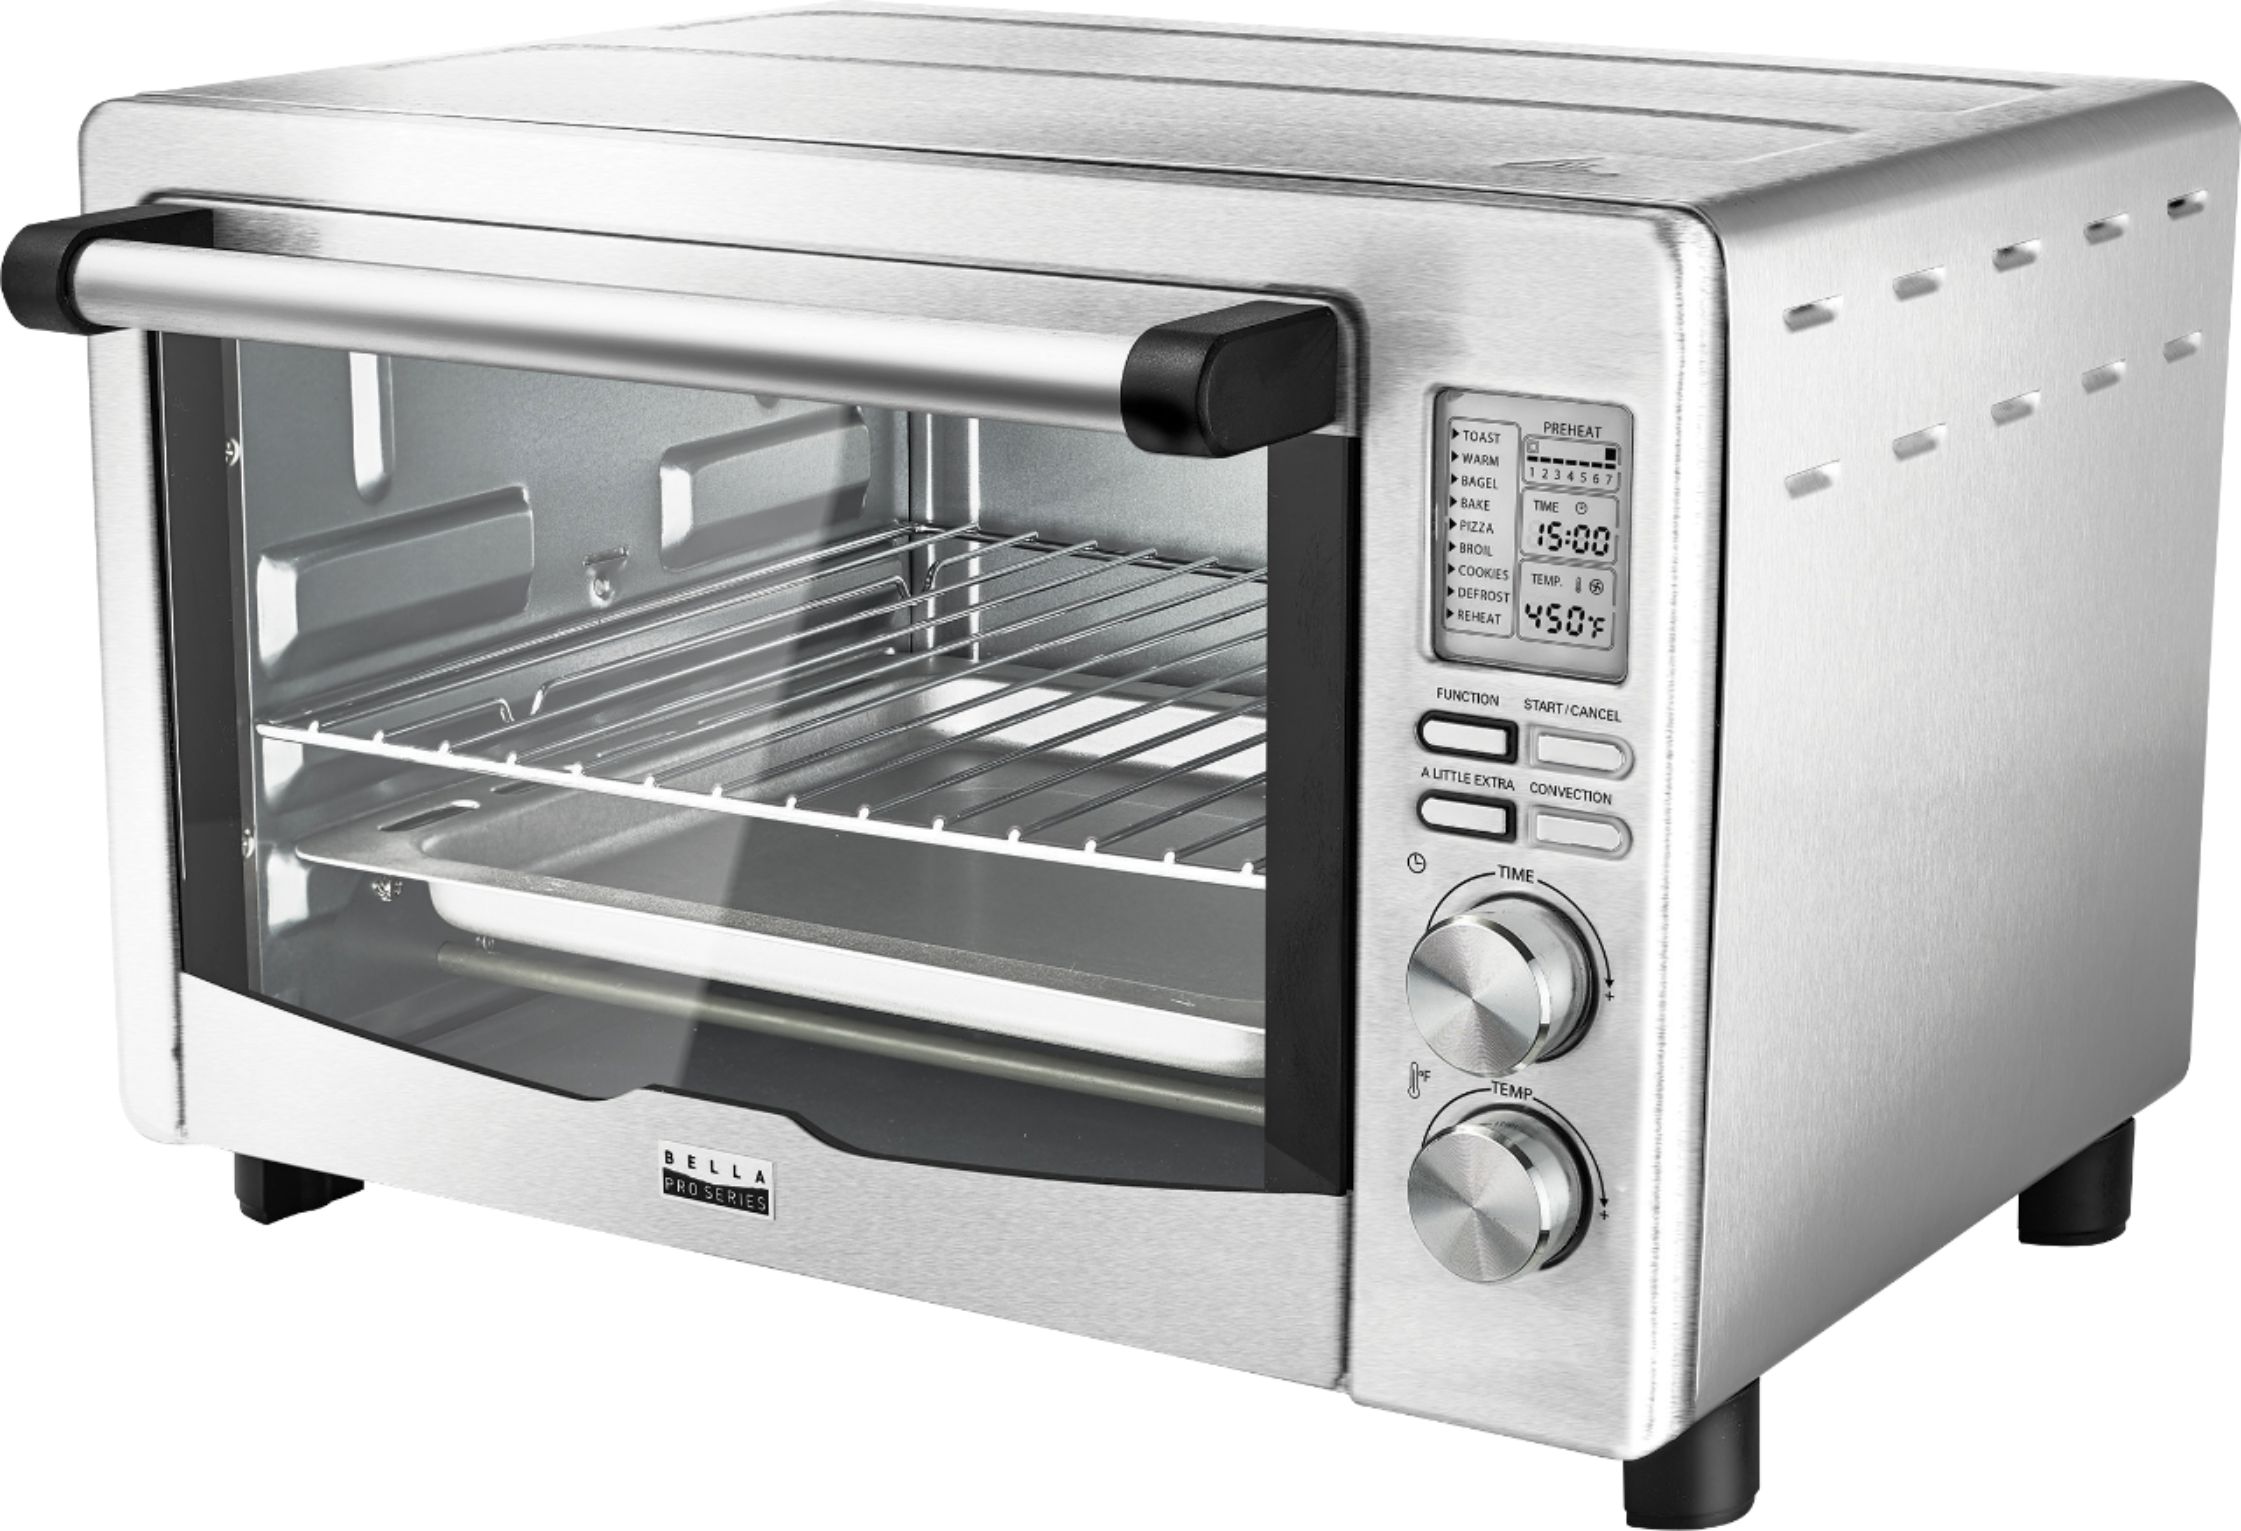 Bella – Pro Series Toaster Oven only $49.99 (reg $100)